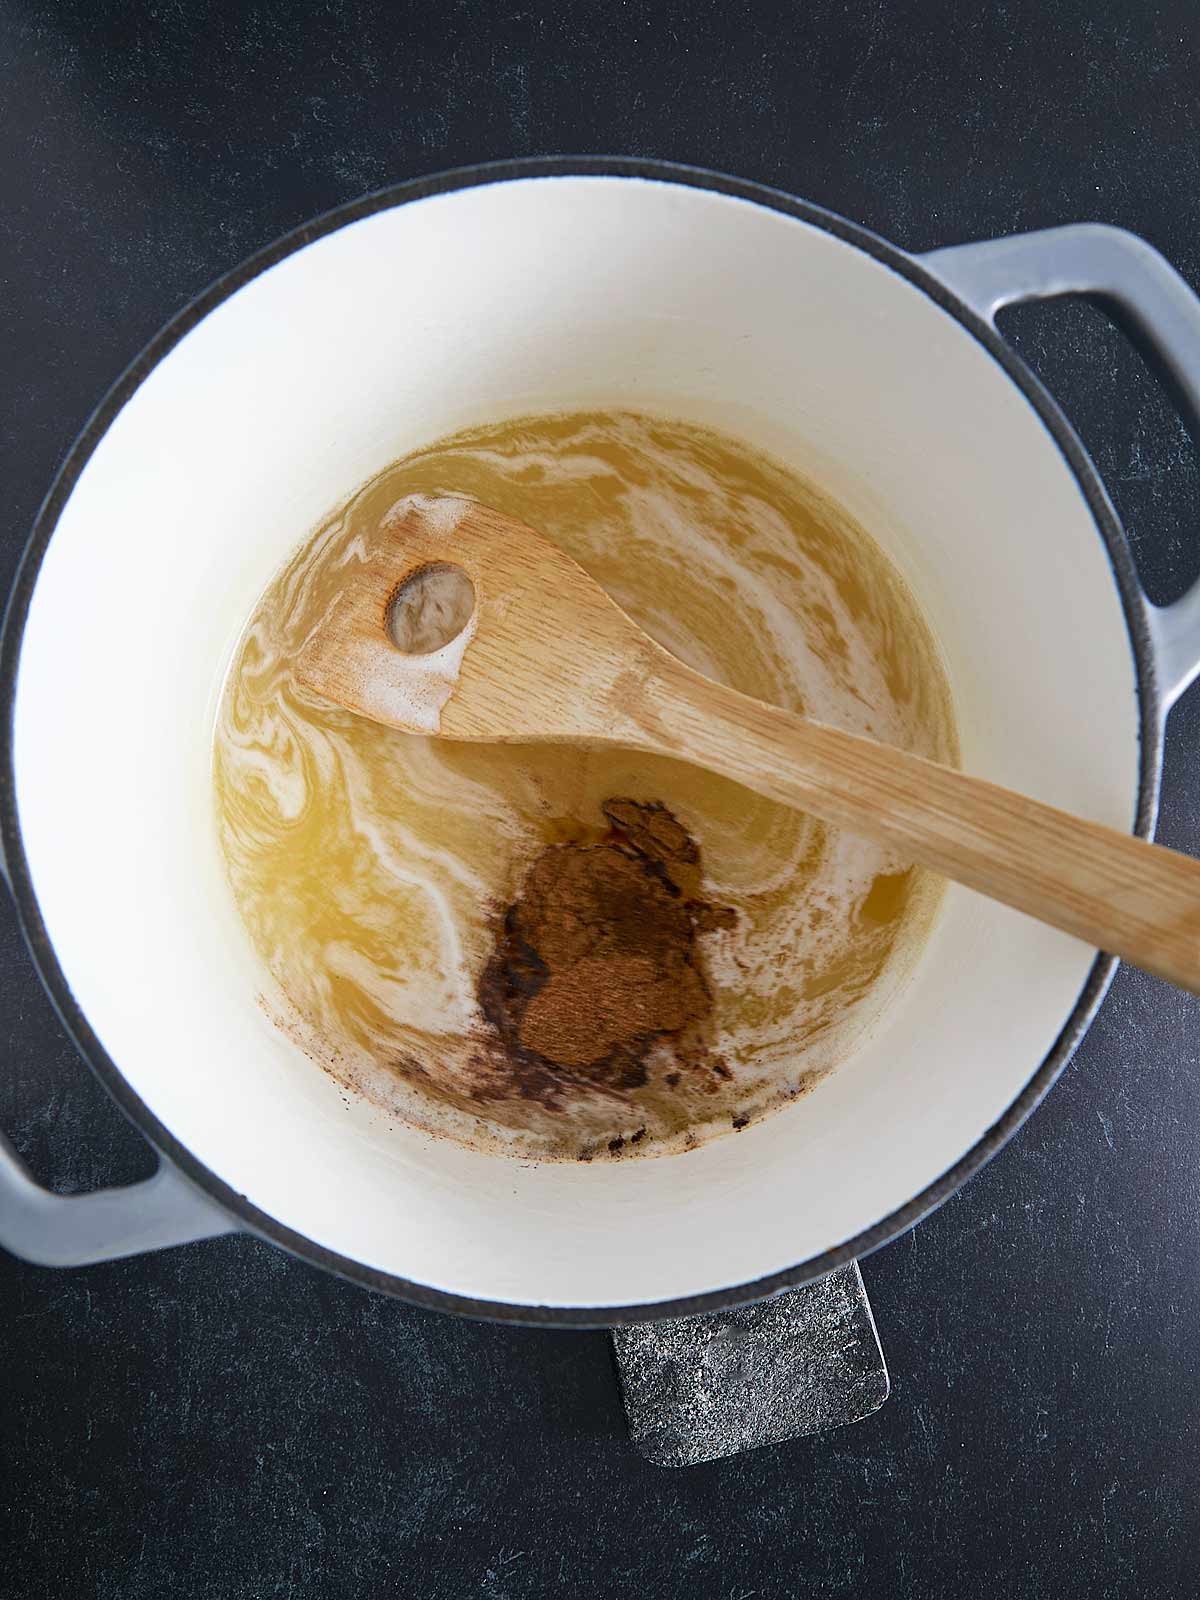 A Irish Spice Cake ingredients cooking in a pot with a wooden spoon.